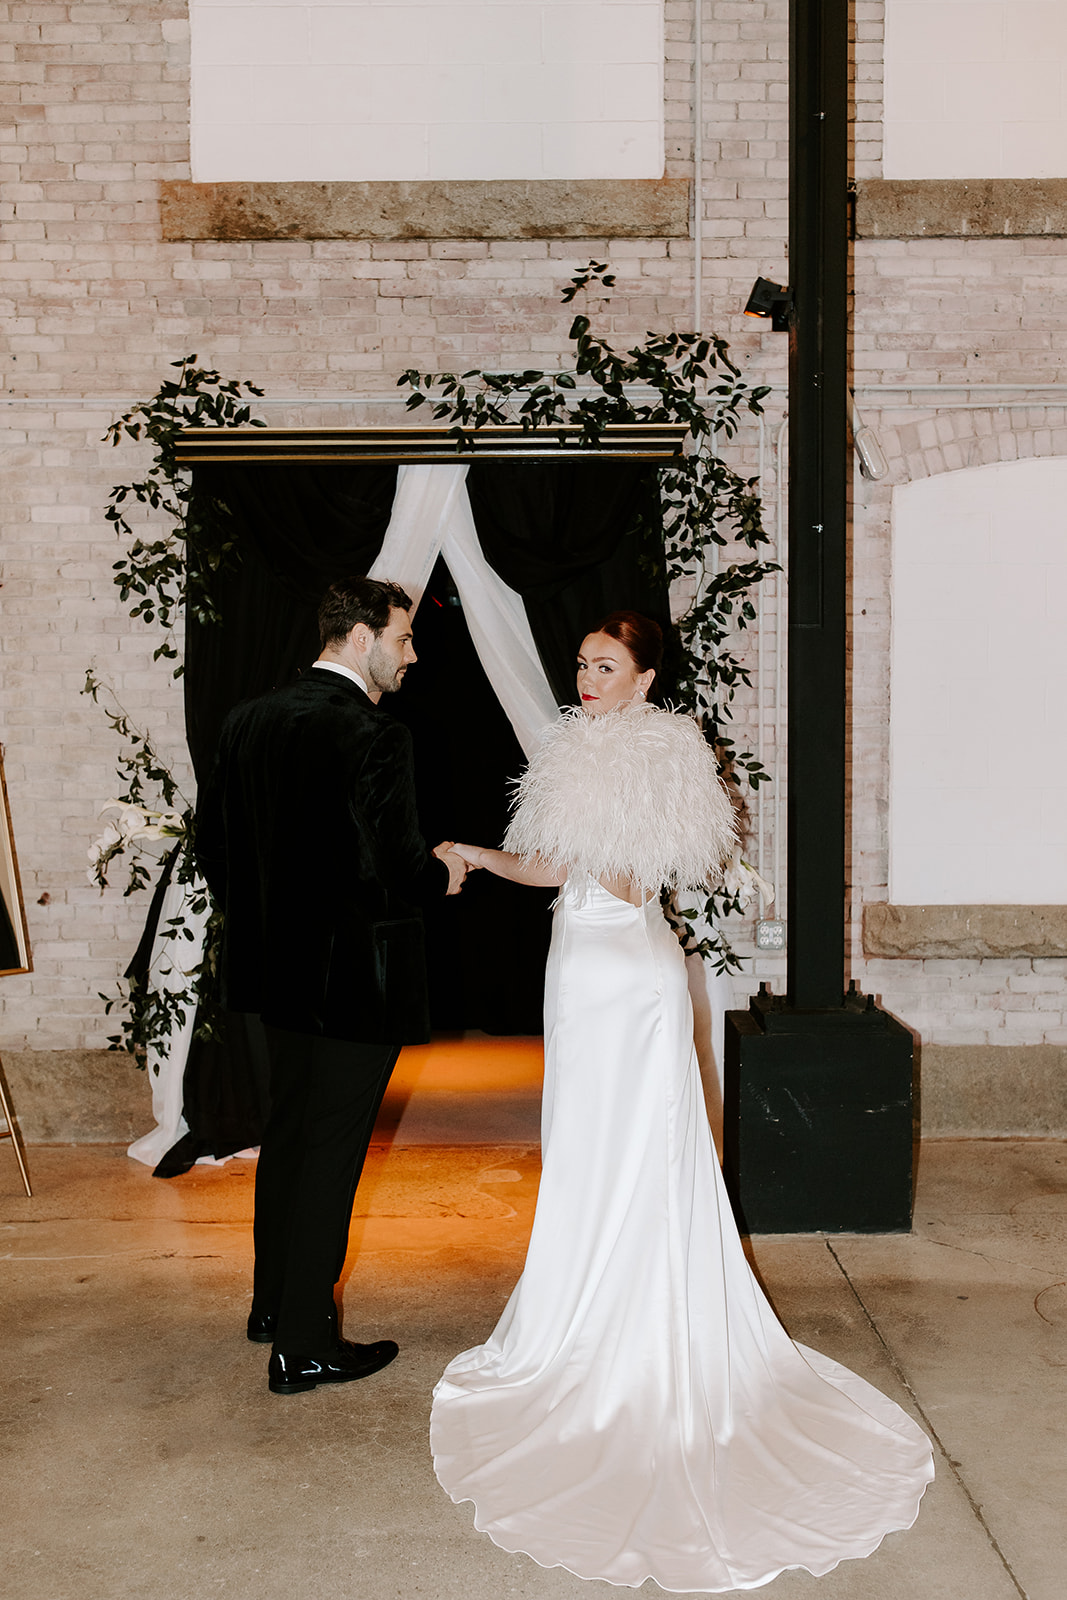 stunning bride and groom pose together after their wedding at the factory wedding venue